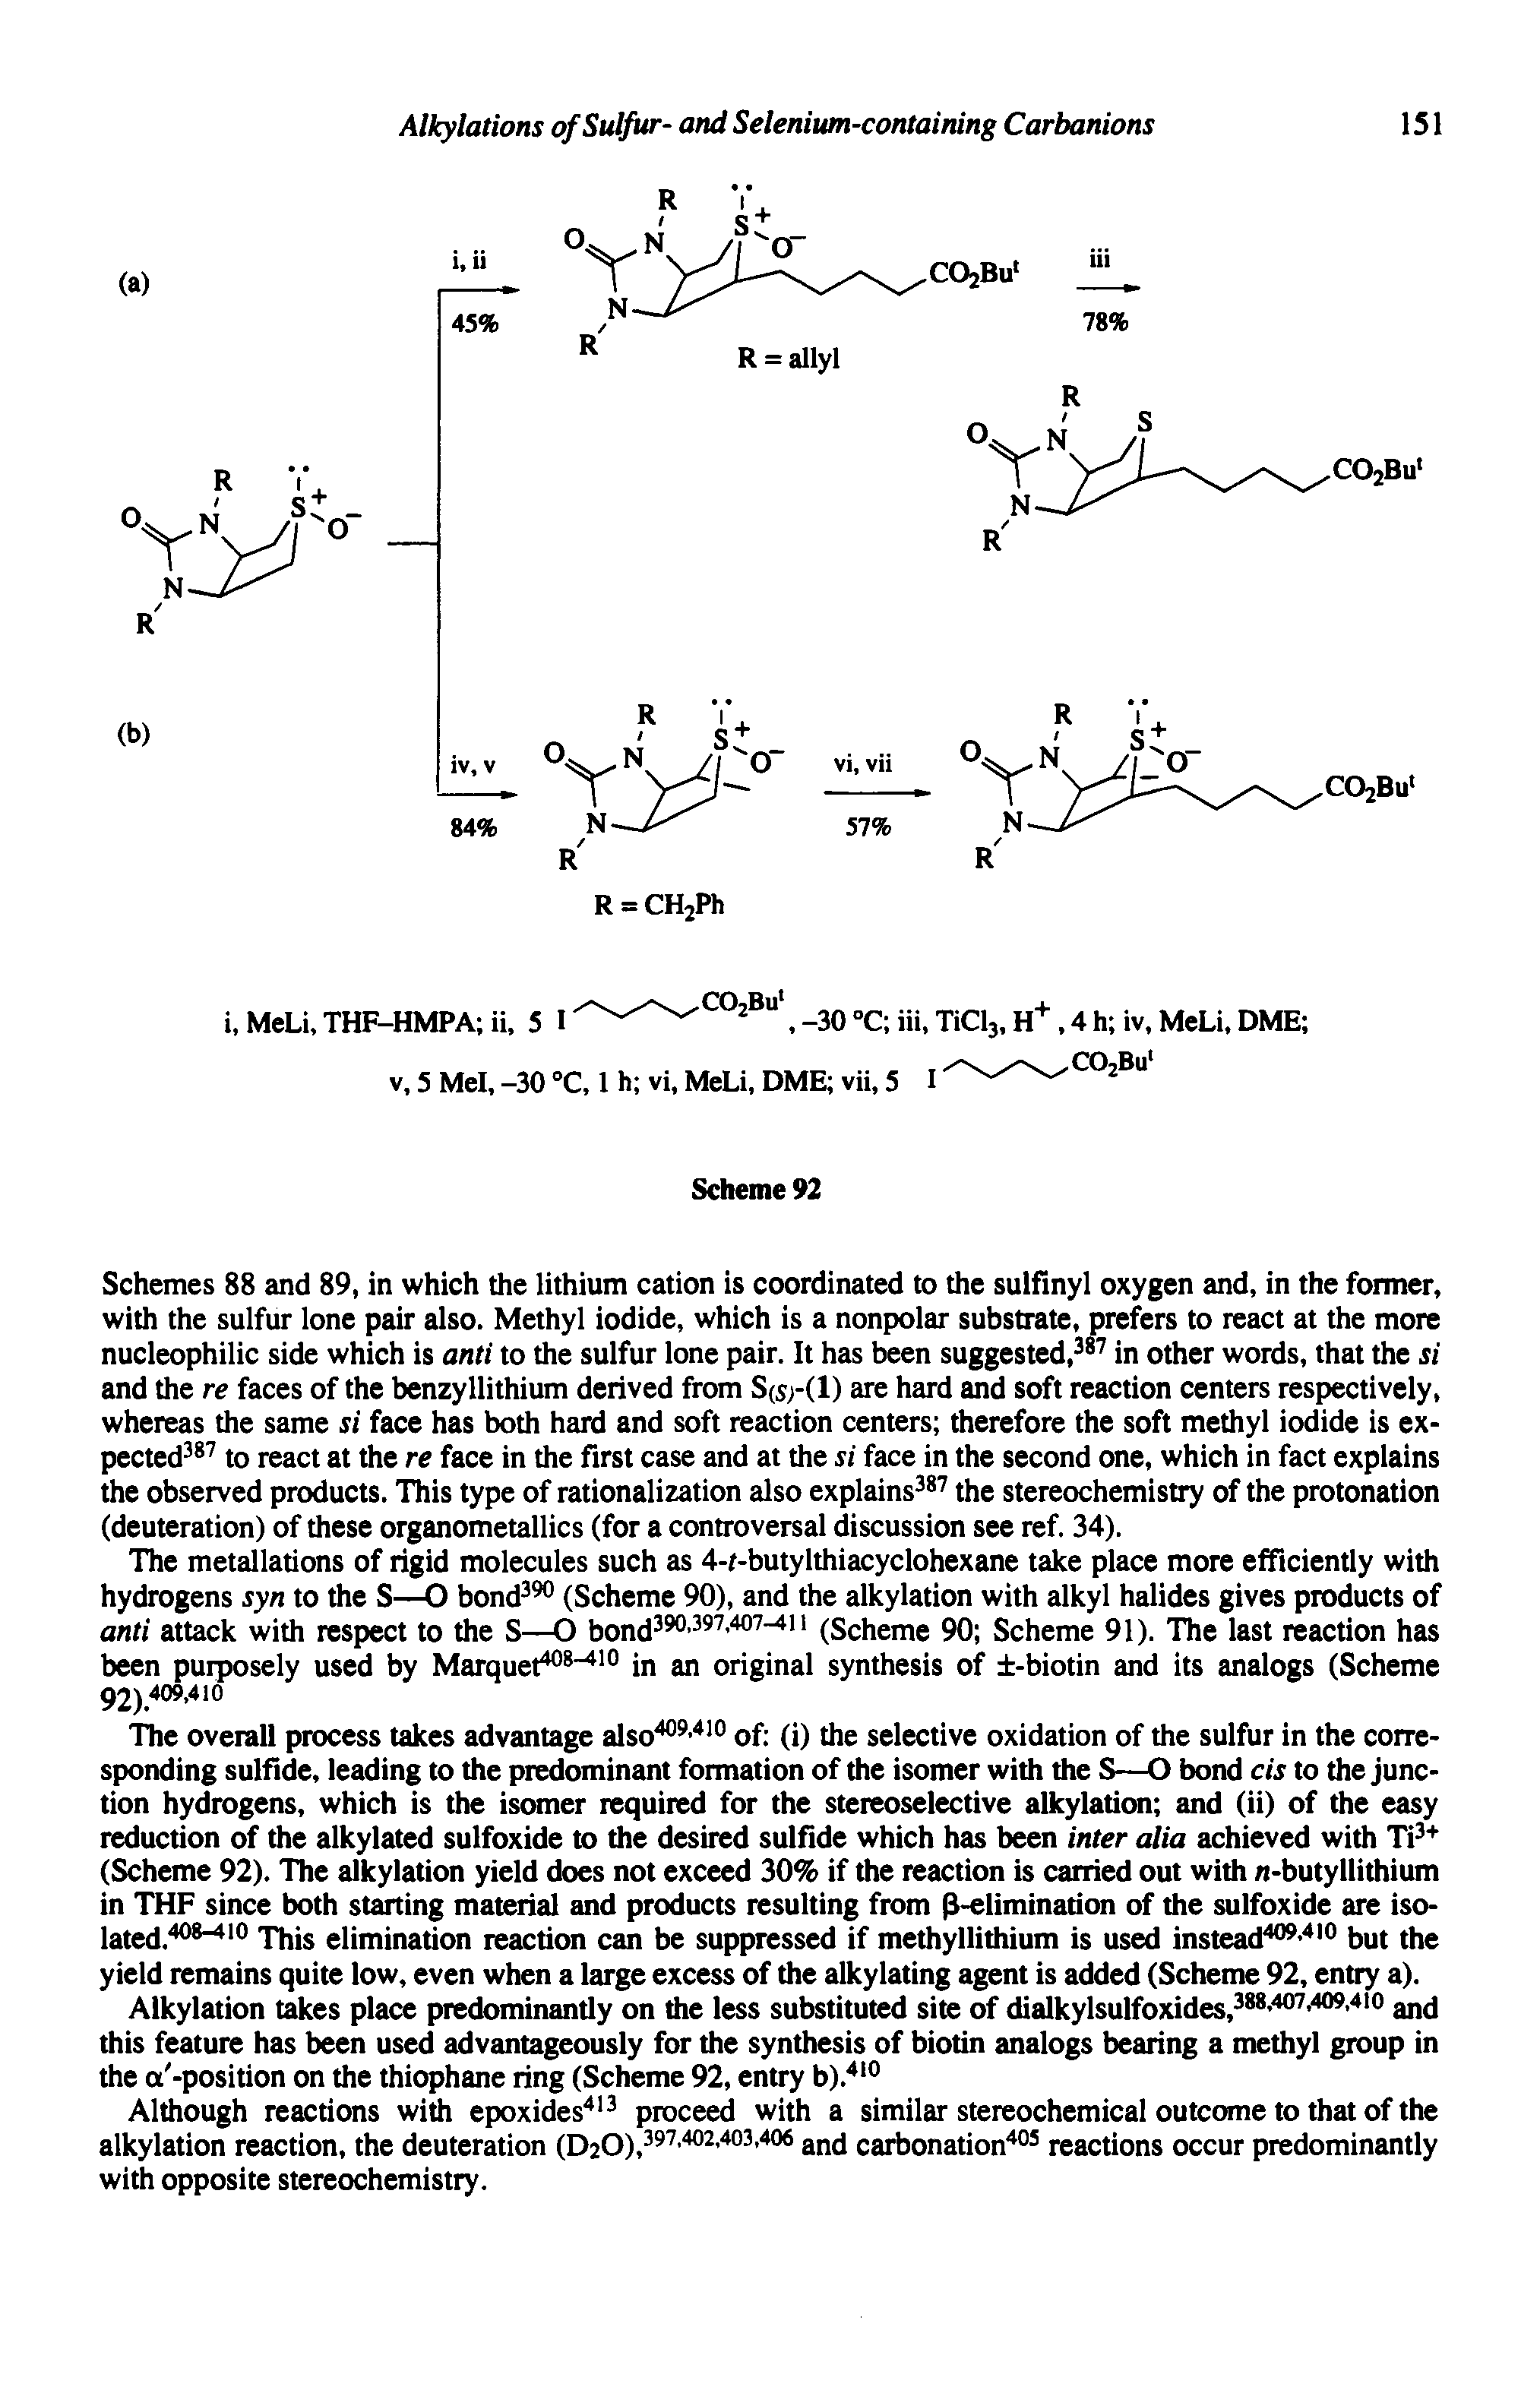 Schemes 88 and 89, in which the lithium cation is coordinated to the sulfinyl oxygen and, in the former, with the sulfur lone pair also. Methyl iodide, which is a nonpolar substrate, prefers to react at the more nucleophilic side which is anti to the sulfur lone pair. It has been suggested, in other words, that the si and the re faces of the benzyllithium derived from S(s -(1) are hard and soft reaction centers respectively, whereas the same si face has both hard and soft reaction centers therefore the soft methyl iodide is expected to react at the re face in the first case and at the si face in the second one, which in fact explains the observed products. This type of rationalization also explains the stereochemistry of the protonation (deuteration) of these organometallics (for a controversal discussion see ref. 34).